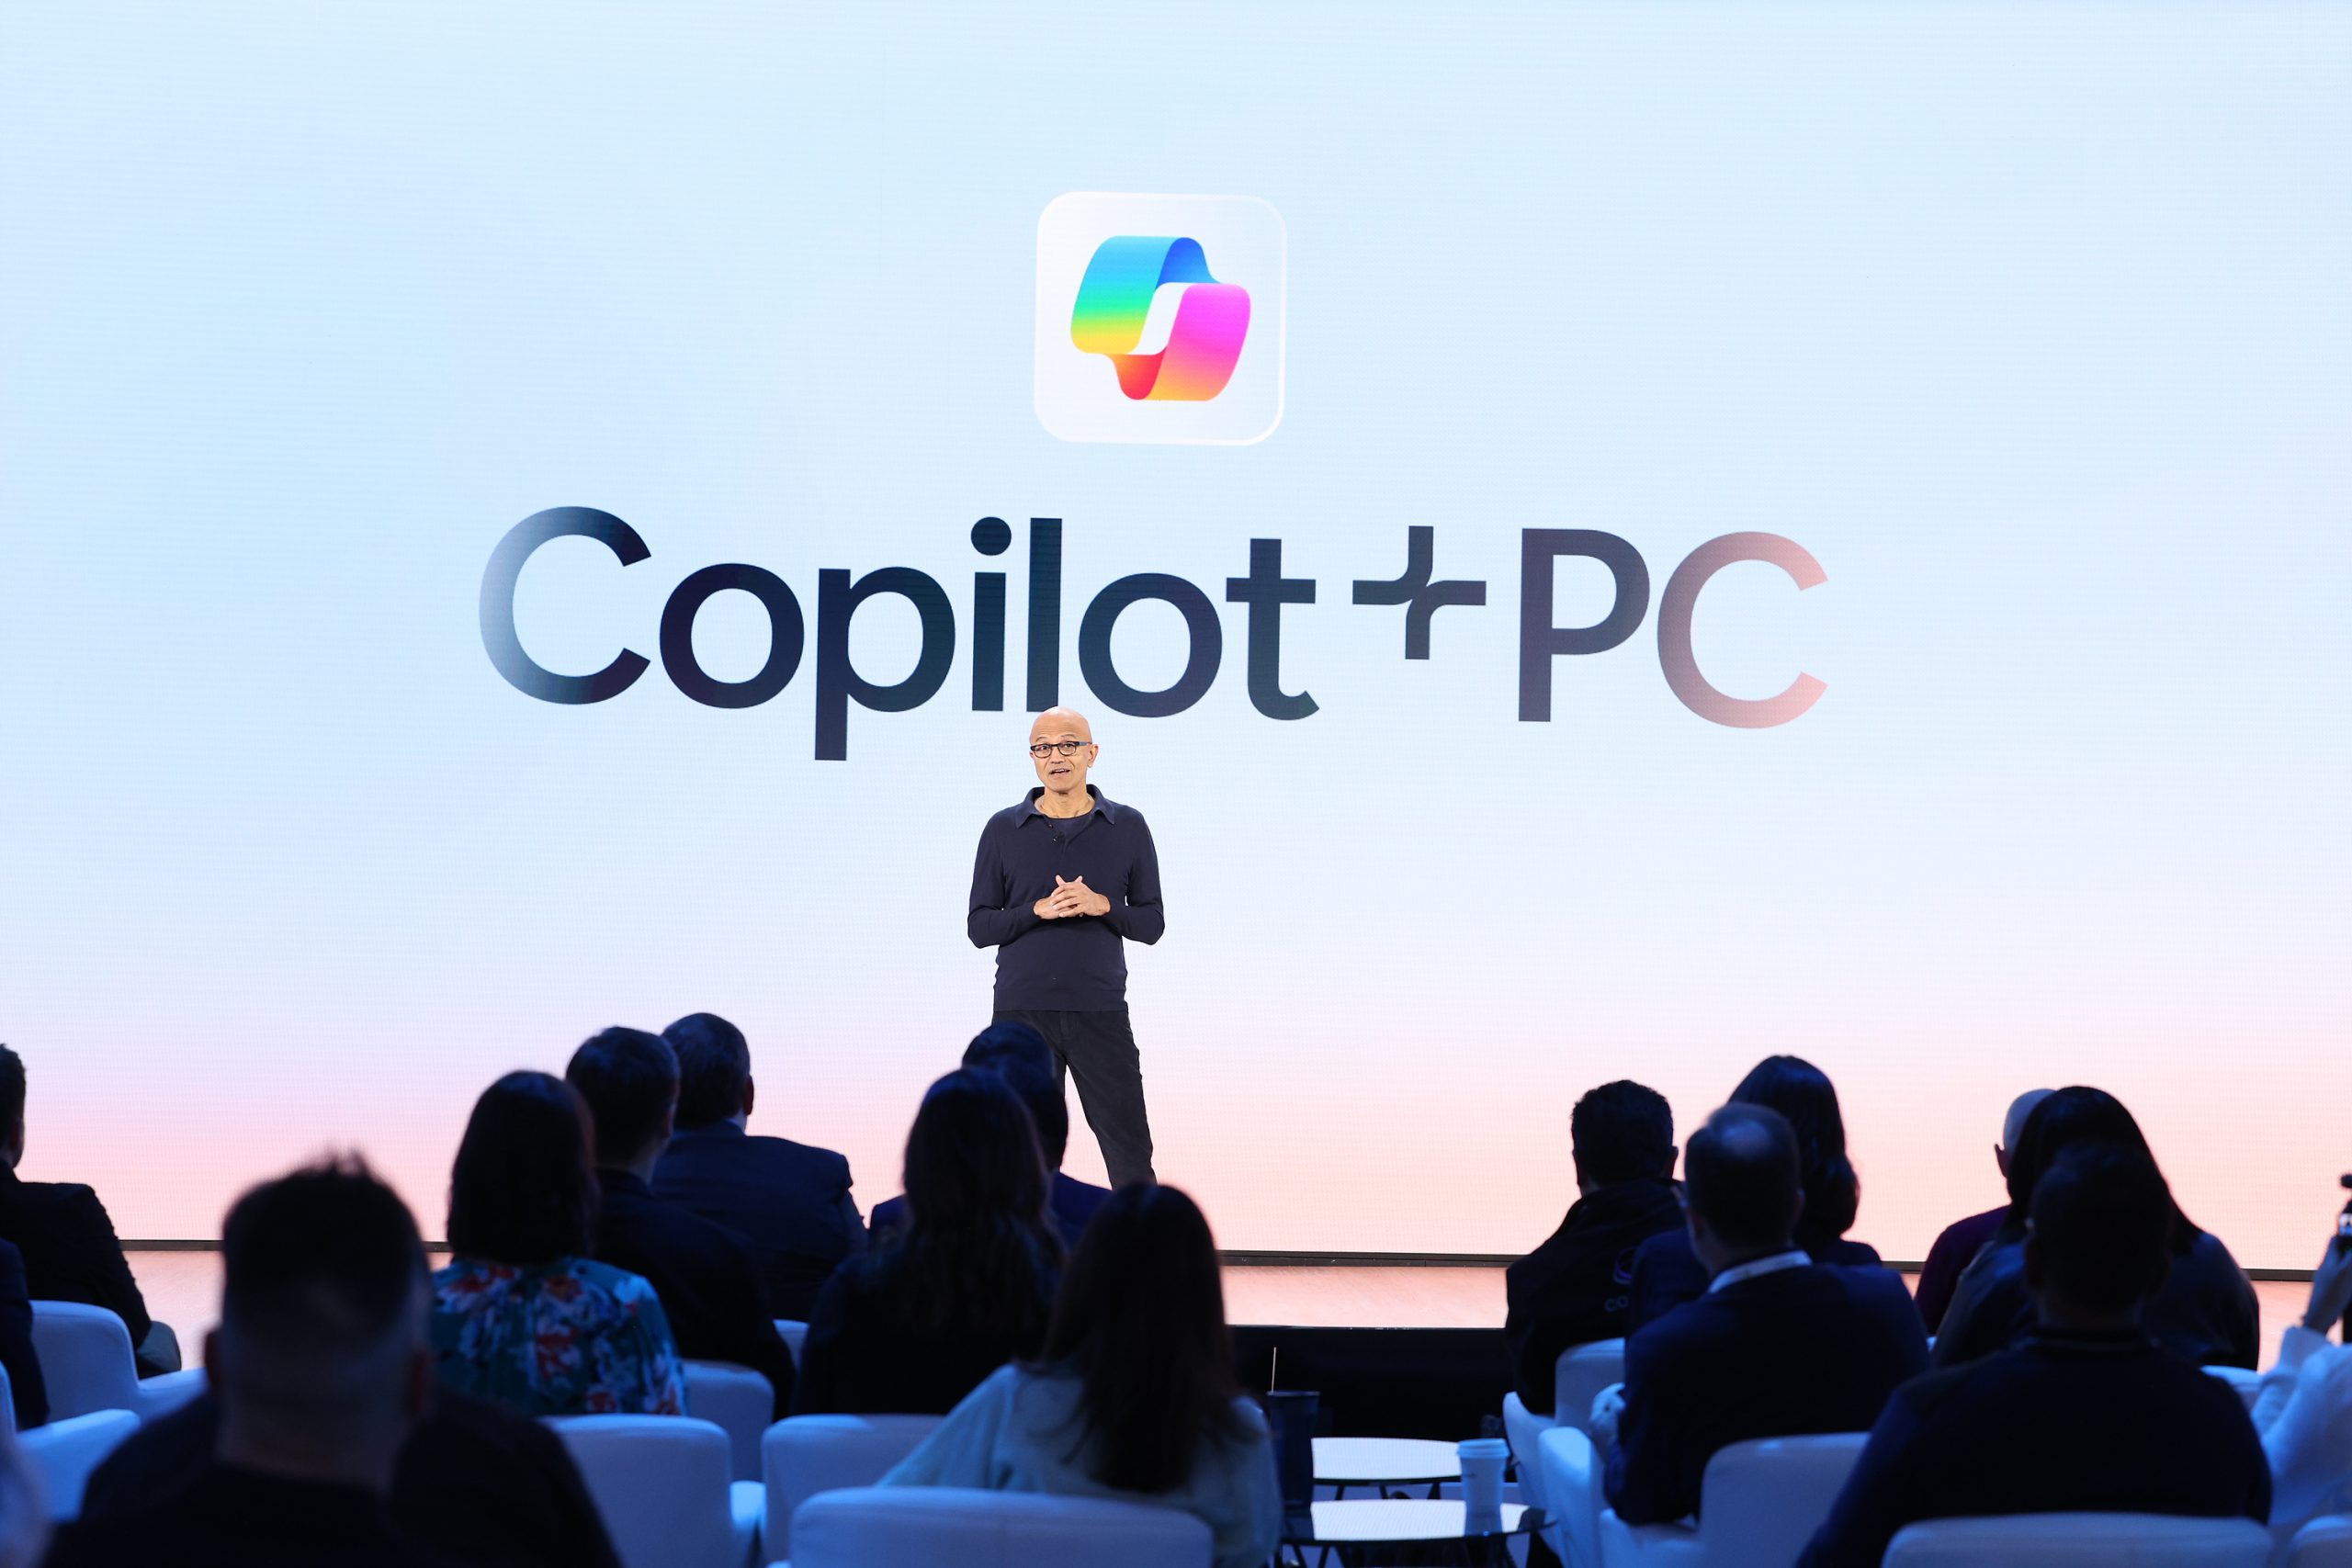 A man stands on a stage in front of an audience under the words “Copilot+ PC”